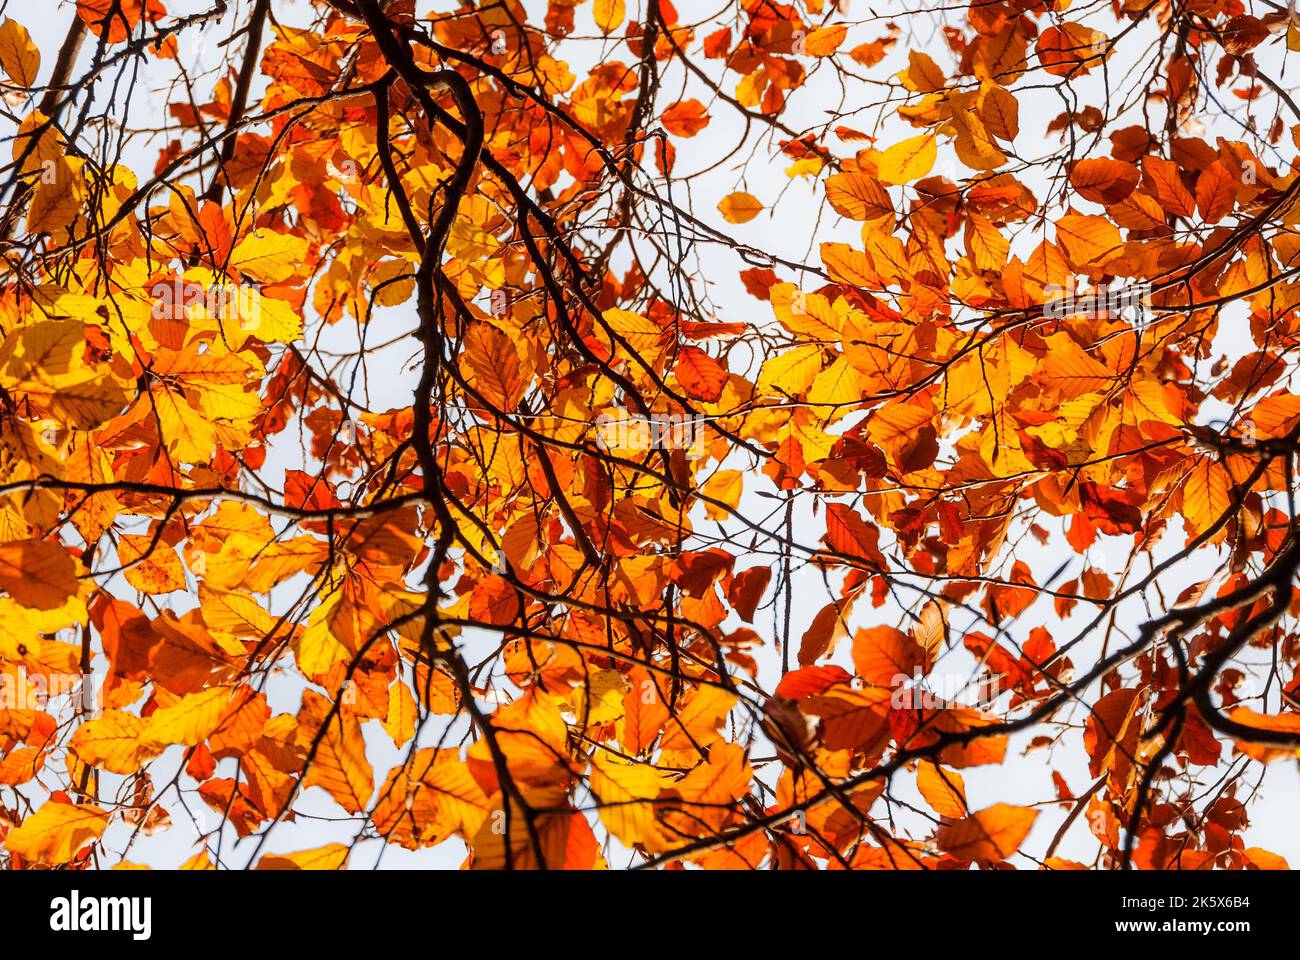 Backlit autumnal golden and orange leaves and foliage as background Stock Photo